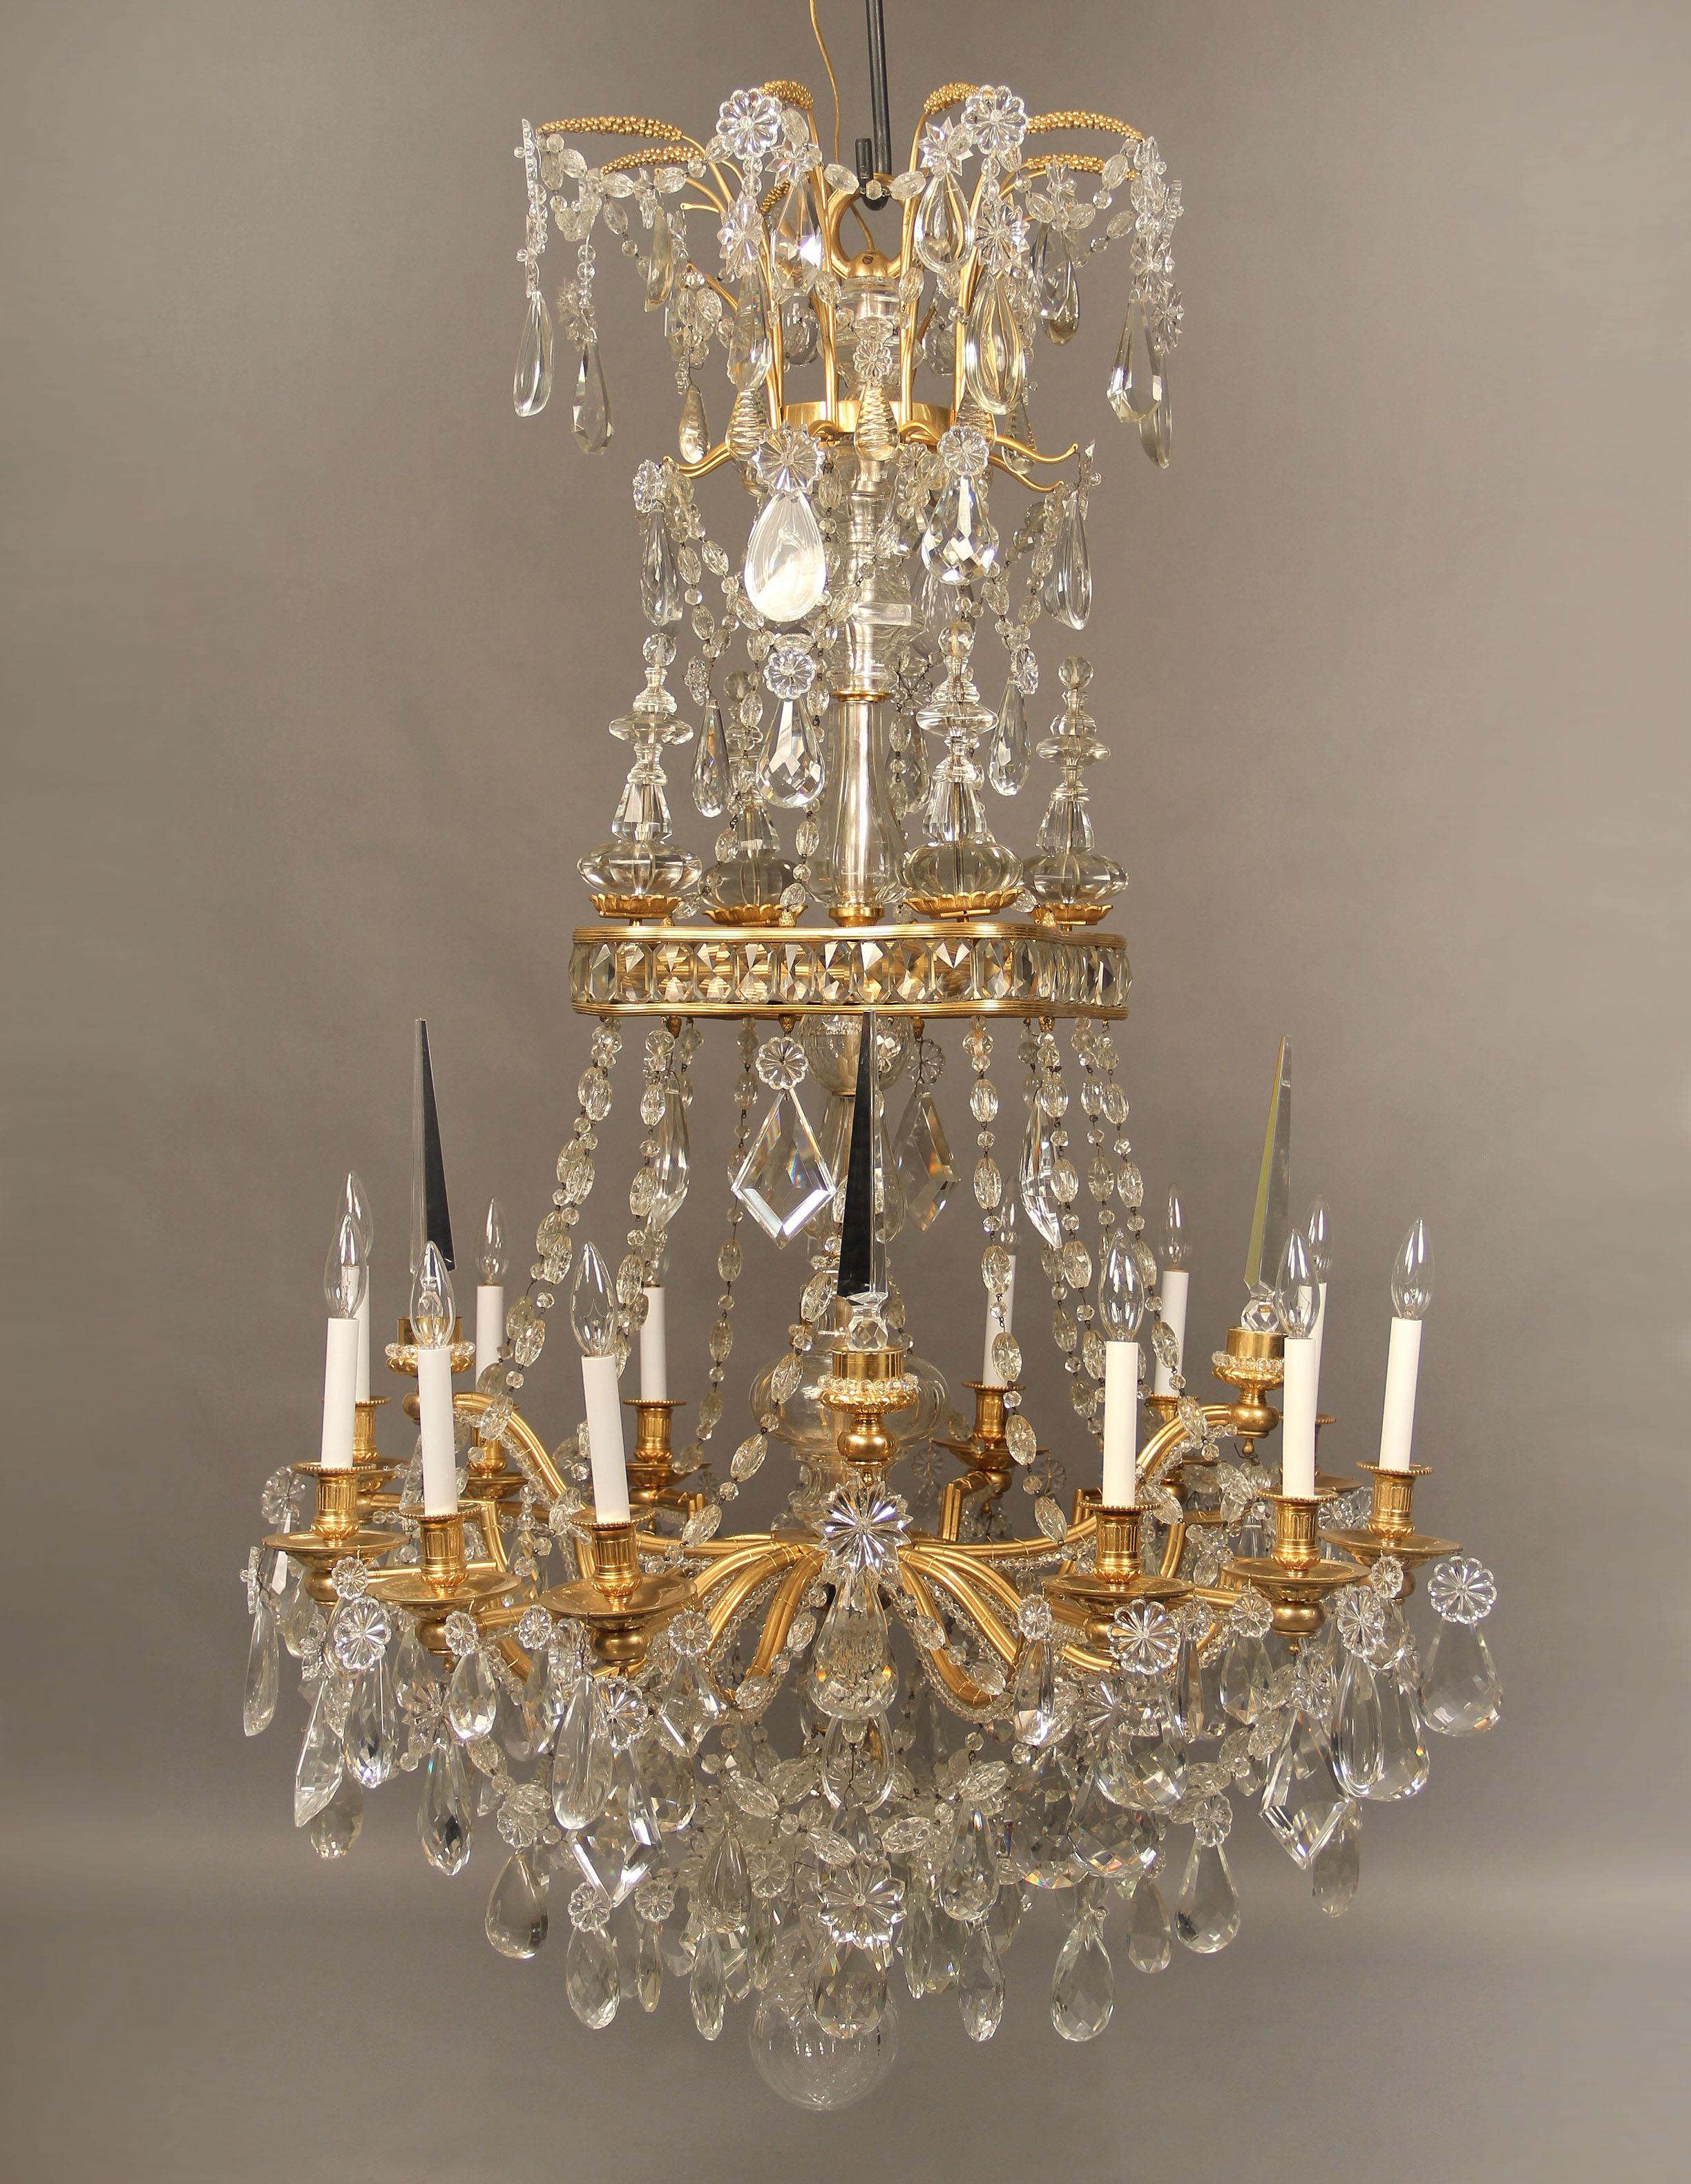 A very fine and special mid-19th century gilt bronze and Baccarat crystal twelve-light chandelier.

Multi-faceted and shaped crystal, cut crystal central column with beaded arms. Four lower and four upper perimeter spears. Twelve perimeter